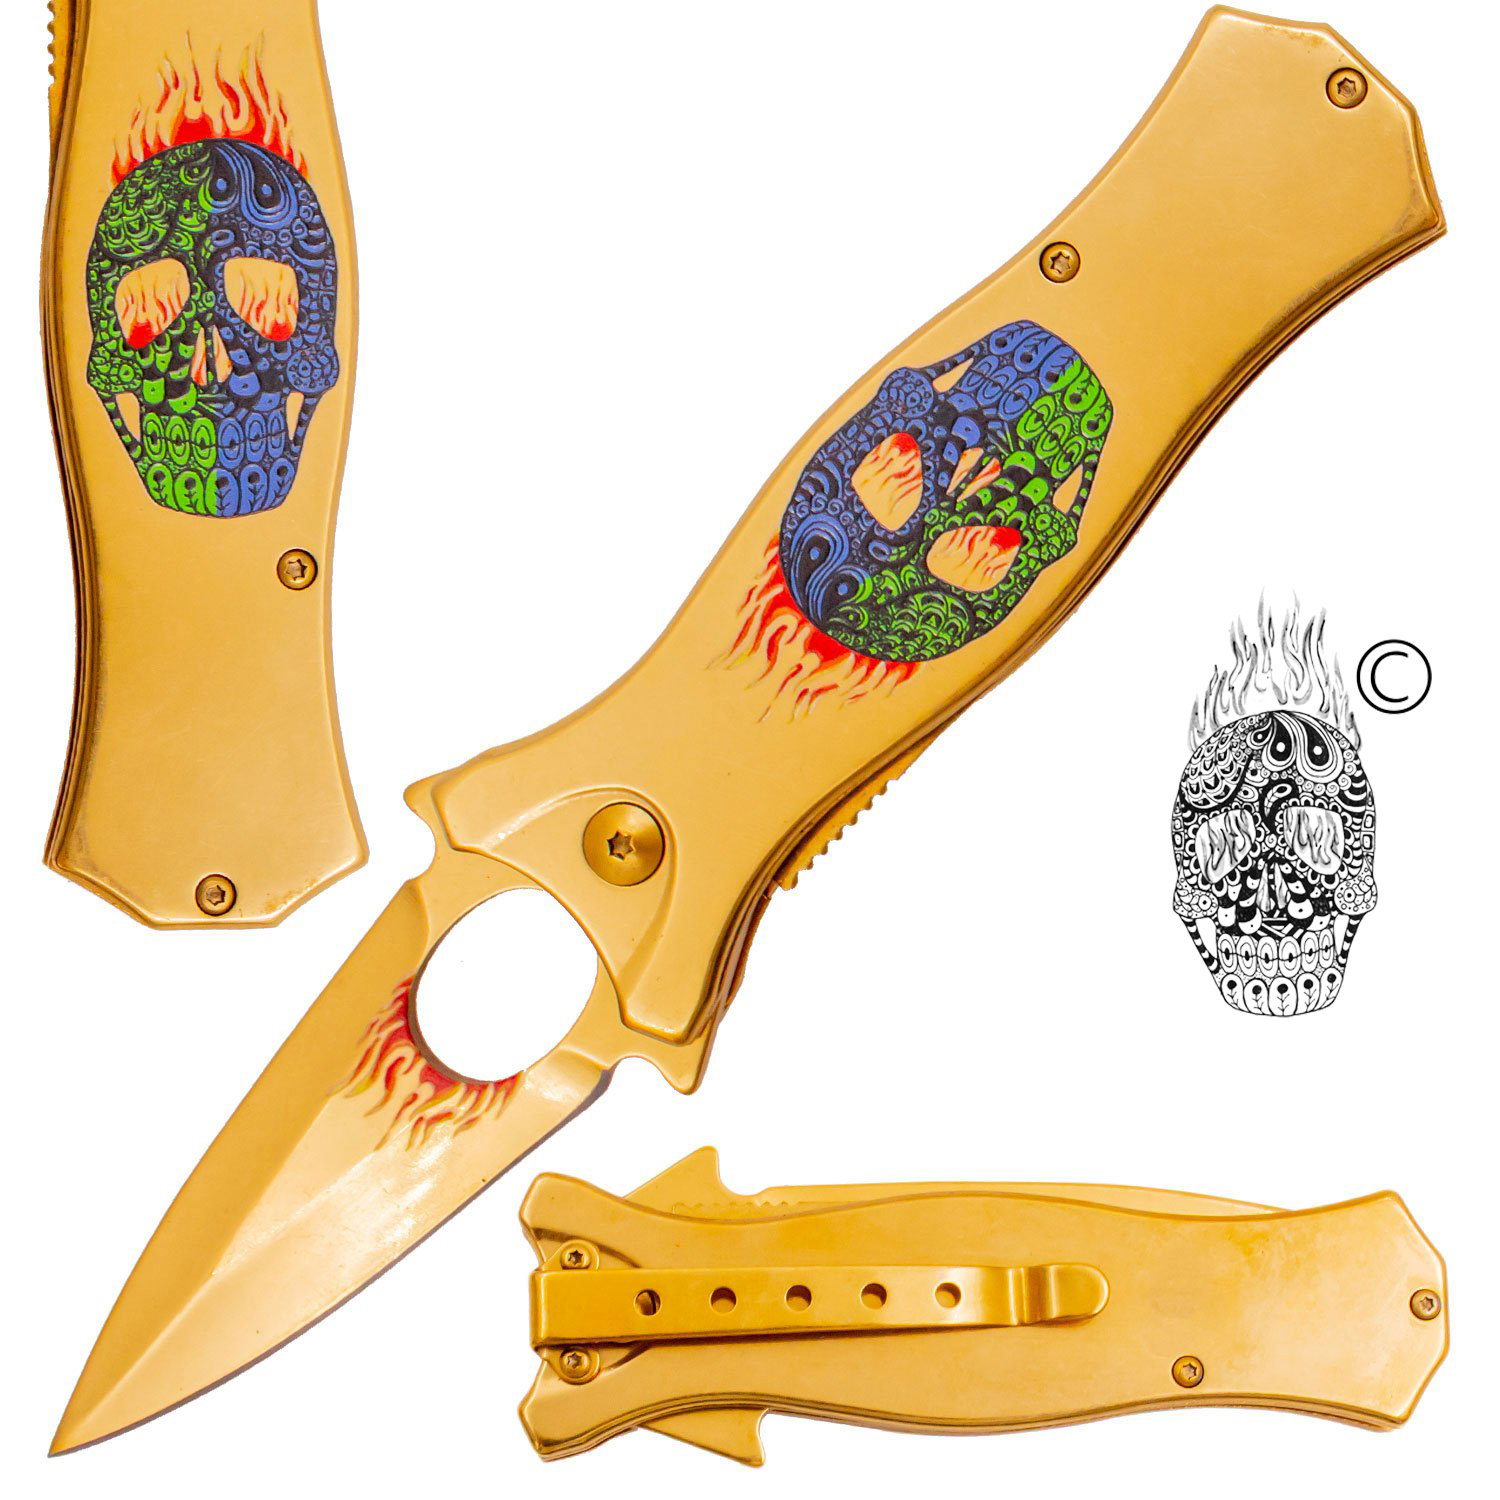 7.5 Inch Golden Ticket Spring Assisted Knife Flaming Sugar Skull (Green and Blue)